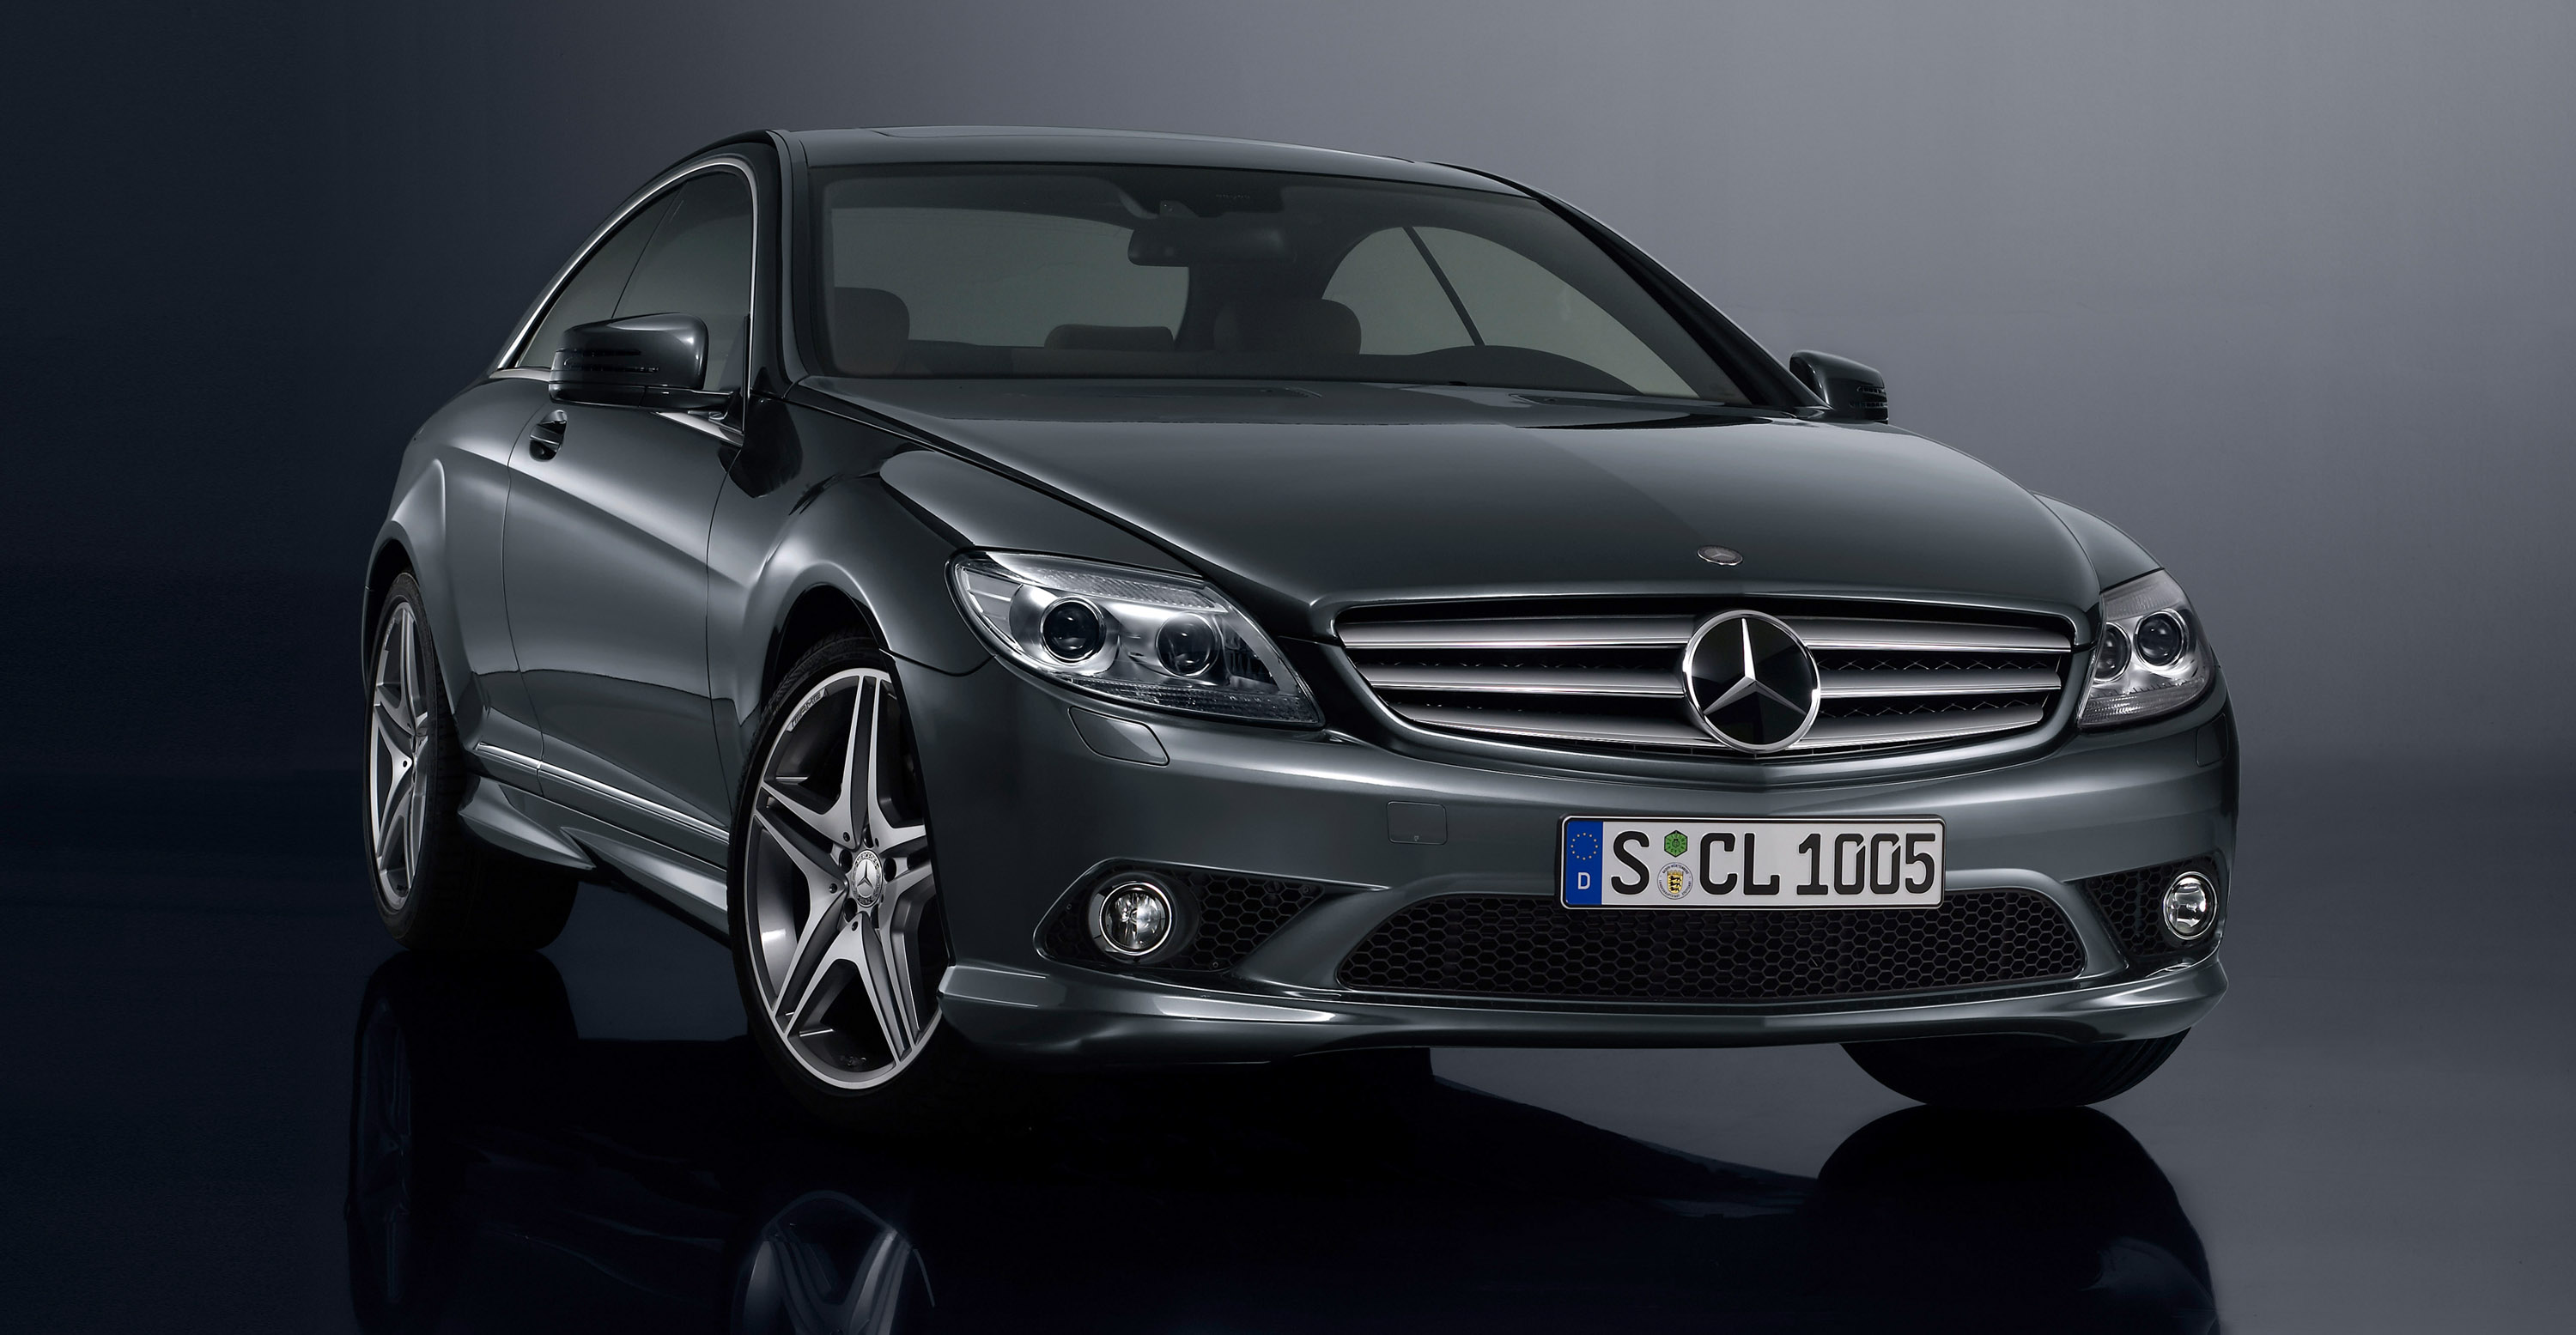 Mercedes-Benz CL 500 '100 years of the trademark' edition